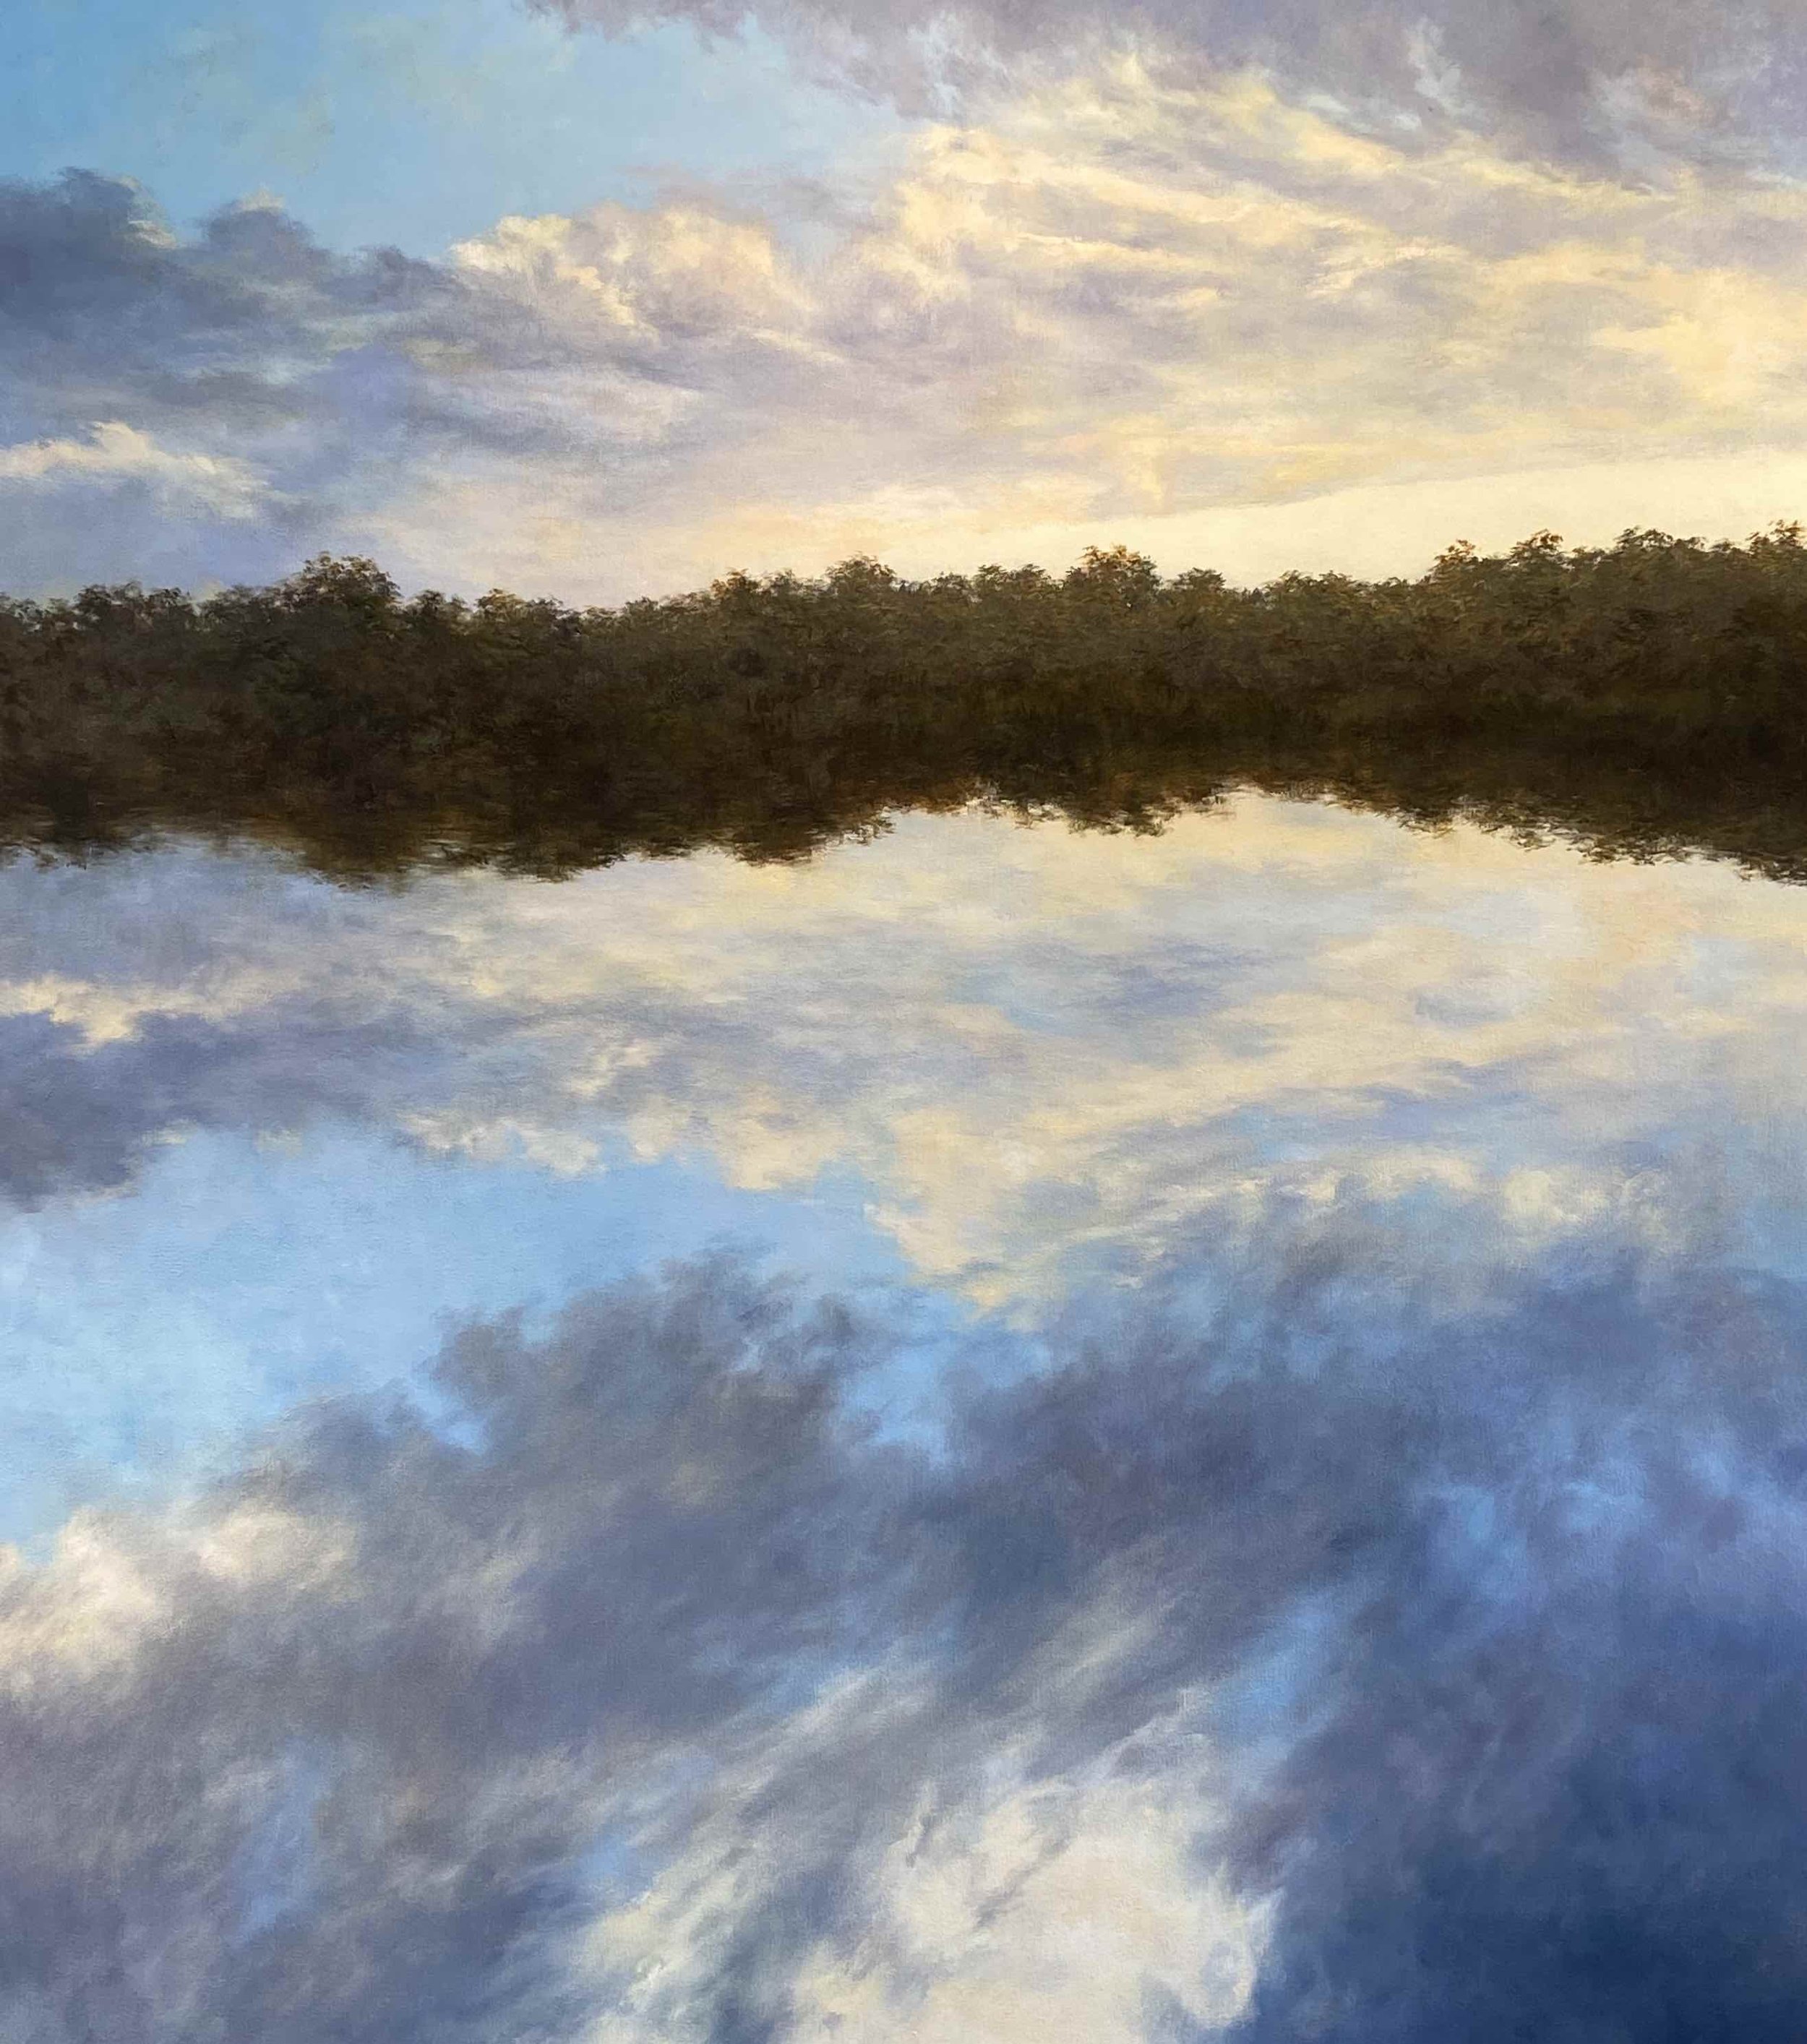 Lagoon Dreaming, Oil on canvas, 137 x 122cm, Sold